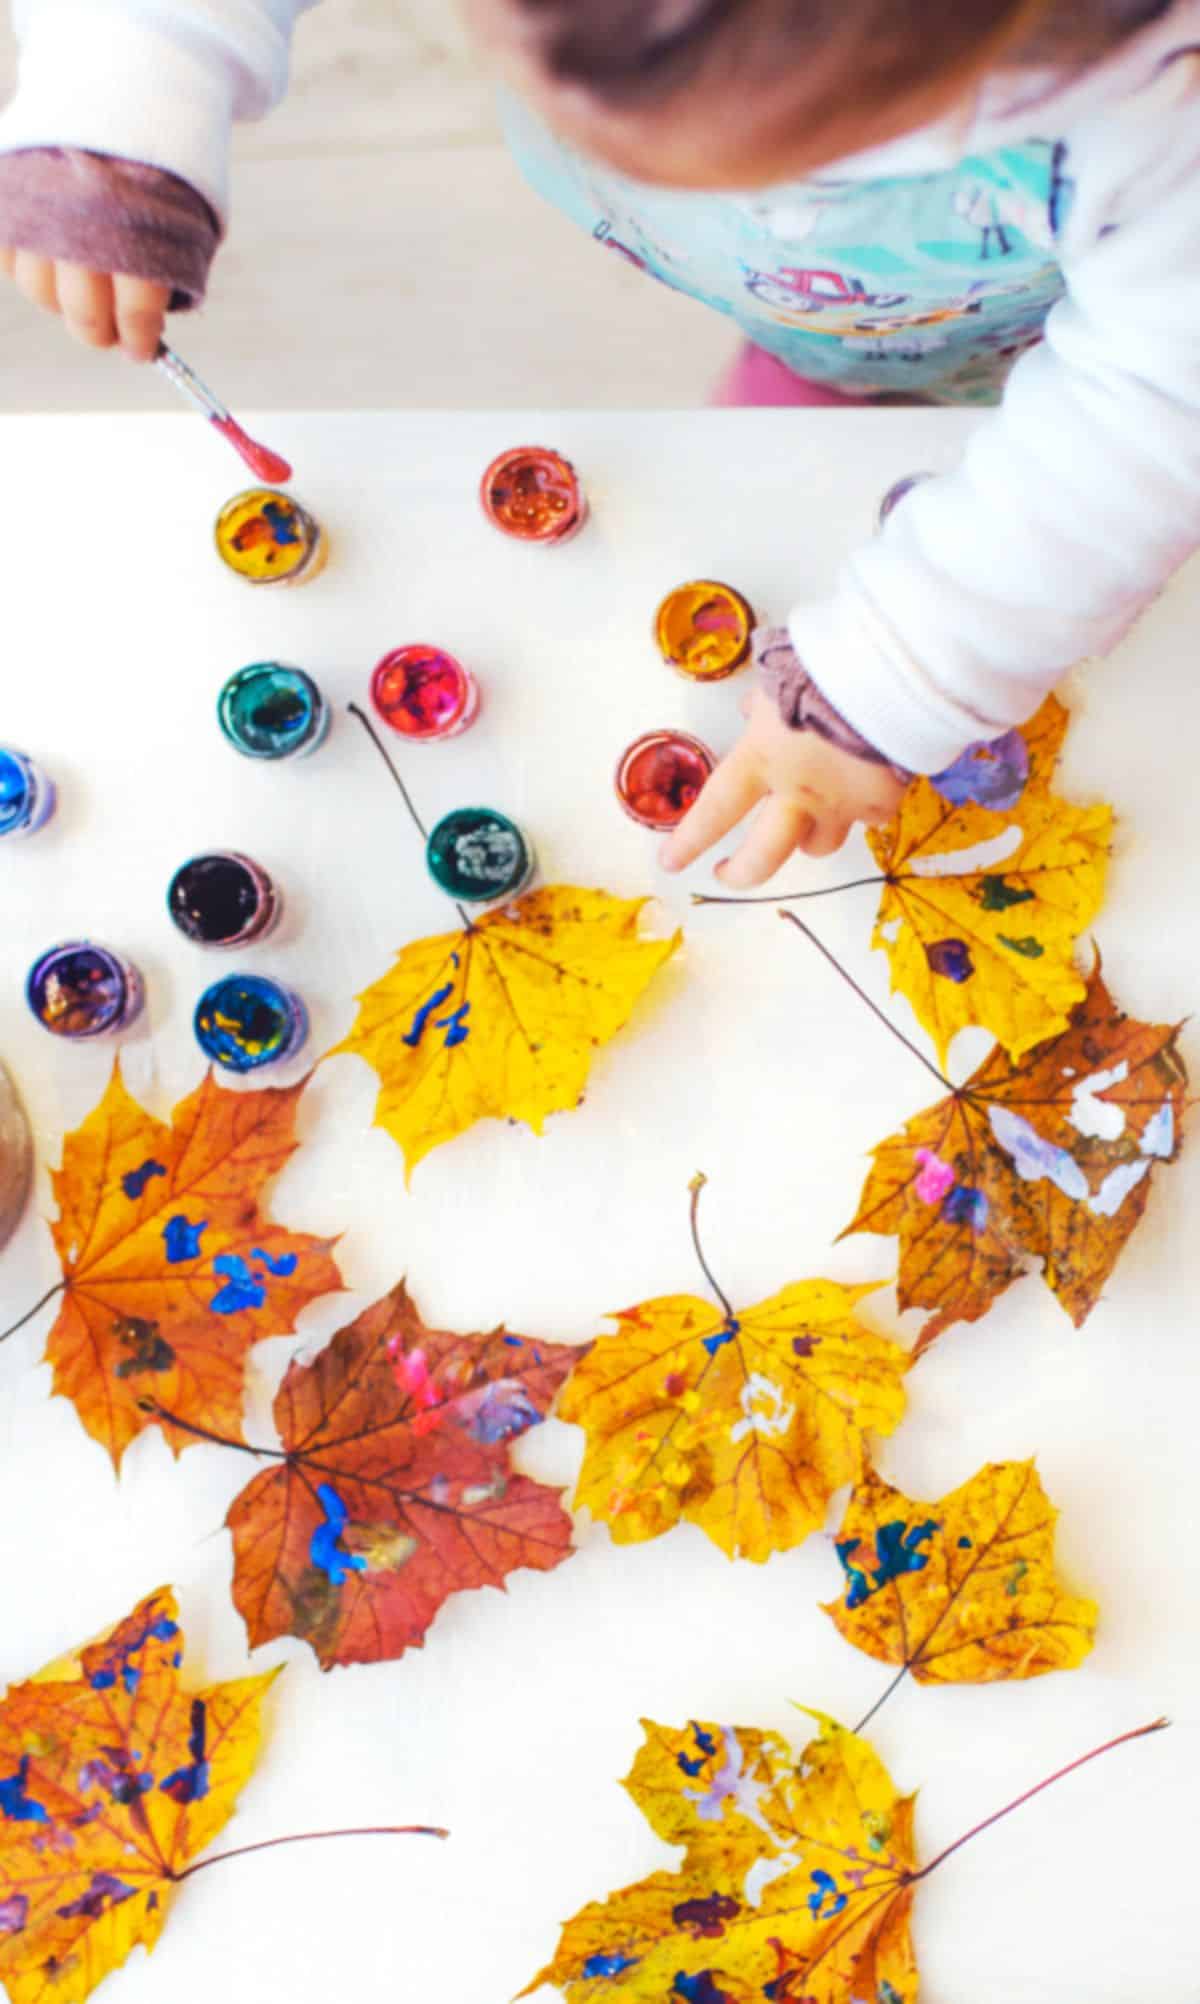 A small girl painting leaves with a brush on a table.